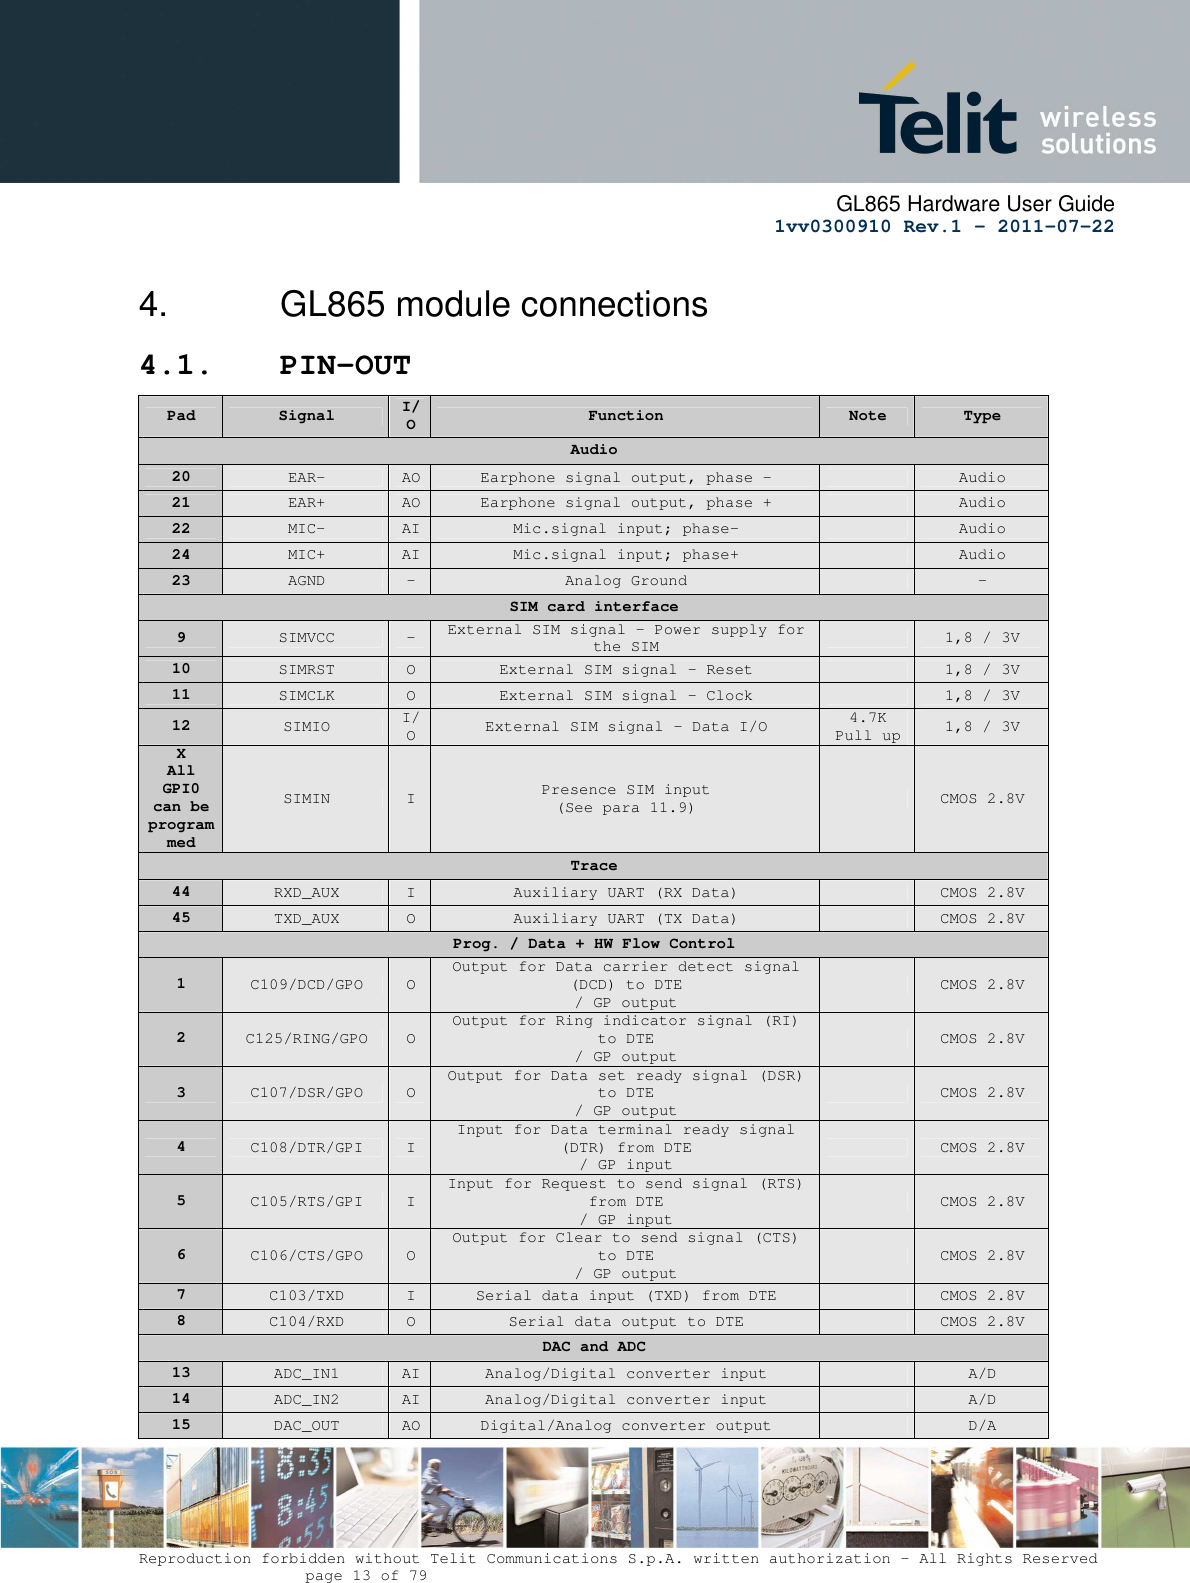      GL865 Hardware User Guide     1vv0300910 Rev.1 – 2011-07-22       Reproduction forbidden without Telit Communications S.p.A. written authorization - All Rights Reserved    page 13 of 79  4.  GL865 module connections  4.1. PIN-OUT Pad  Signal  I/O  Function  Note  Type Audio 20  EAR-  AO Earphone signal output, phase -    Audio 21  EAR+  AO Earphone signal output, phase +    Audio 22  MIC-  AI Mic.signal input; phase-    Audio 24  MIC+  AI Mic.signal input; phase+    Audio 23  AGND  -  Analog Ground    - SIM card interface 9  SIMVCC  -  External SIM signal – Power supply for the SIM    1,8 / 3V 10  SIMRST  O  External SIM signal – Reset    1,8 / 3V 11  SIMCLK  O  External SIM signal – Clock    1,8 / 3V 12  SIMIO  I/O  External SIM signal – Data I/O  4.7K Pull up  1,8 / 3V X All GPI0 can be  programmed SIMIN  I  Presence SIM input (See para 11.9)    CMOS 2.8V Trace 44  RXD_AUX  I  Auxiliary UART (RX Data)    CMOS 2.8V 45  TXD_AUX  O  Auxiliary UART (TX Data)    CMOS 2.8V Prog. / Data + HW Flow Control 1  C109/DCD/GPO  O Output for Data carrier detect signal (DCD) to DTE  / GP output   CMOS 2.8V 2  C125/RING/GPO  O Output for Ring indicator signal (RI) to DTE / GP output   CMOS 2.8V 3  C107/DSR/GPO  O Output for Data set ready signal (DSR) to DTE / GP output   CMOS 2.8V 4  C108/DTR/GPI  I Input for Data terminal ready signal (DTR) from DTE / GP input   CMOS 2.8V 5  C105/RTS/GPI  I Input for Request to send signal (RTS) from DTE / GP input   CMOS 2.8V 6  C106/CTS/GPO  O Output for Clear to send signal (CTS) to DTE / GP output   CMOS 2.8V 7  C103/TXD  I  Serial data input (TXD) from DTE    CMOS 2.8V 8  C104/RXD  O  Serial data output to DTE    CMOS 2.8V DAC and ADC 13  ADC_IN1  AI Analog/Digital converter input    A/D 14  ADC_IN2  AI Analog/Digital converter input    A/D 15  DAC_OUT  AO Digital/Analog converter output    D/A 